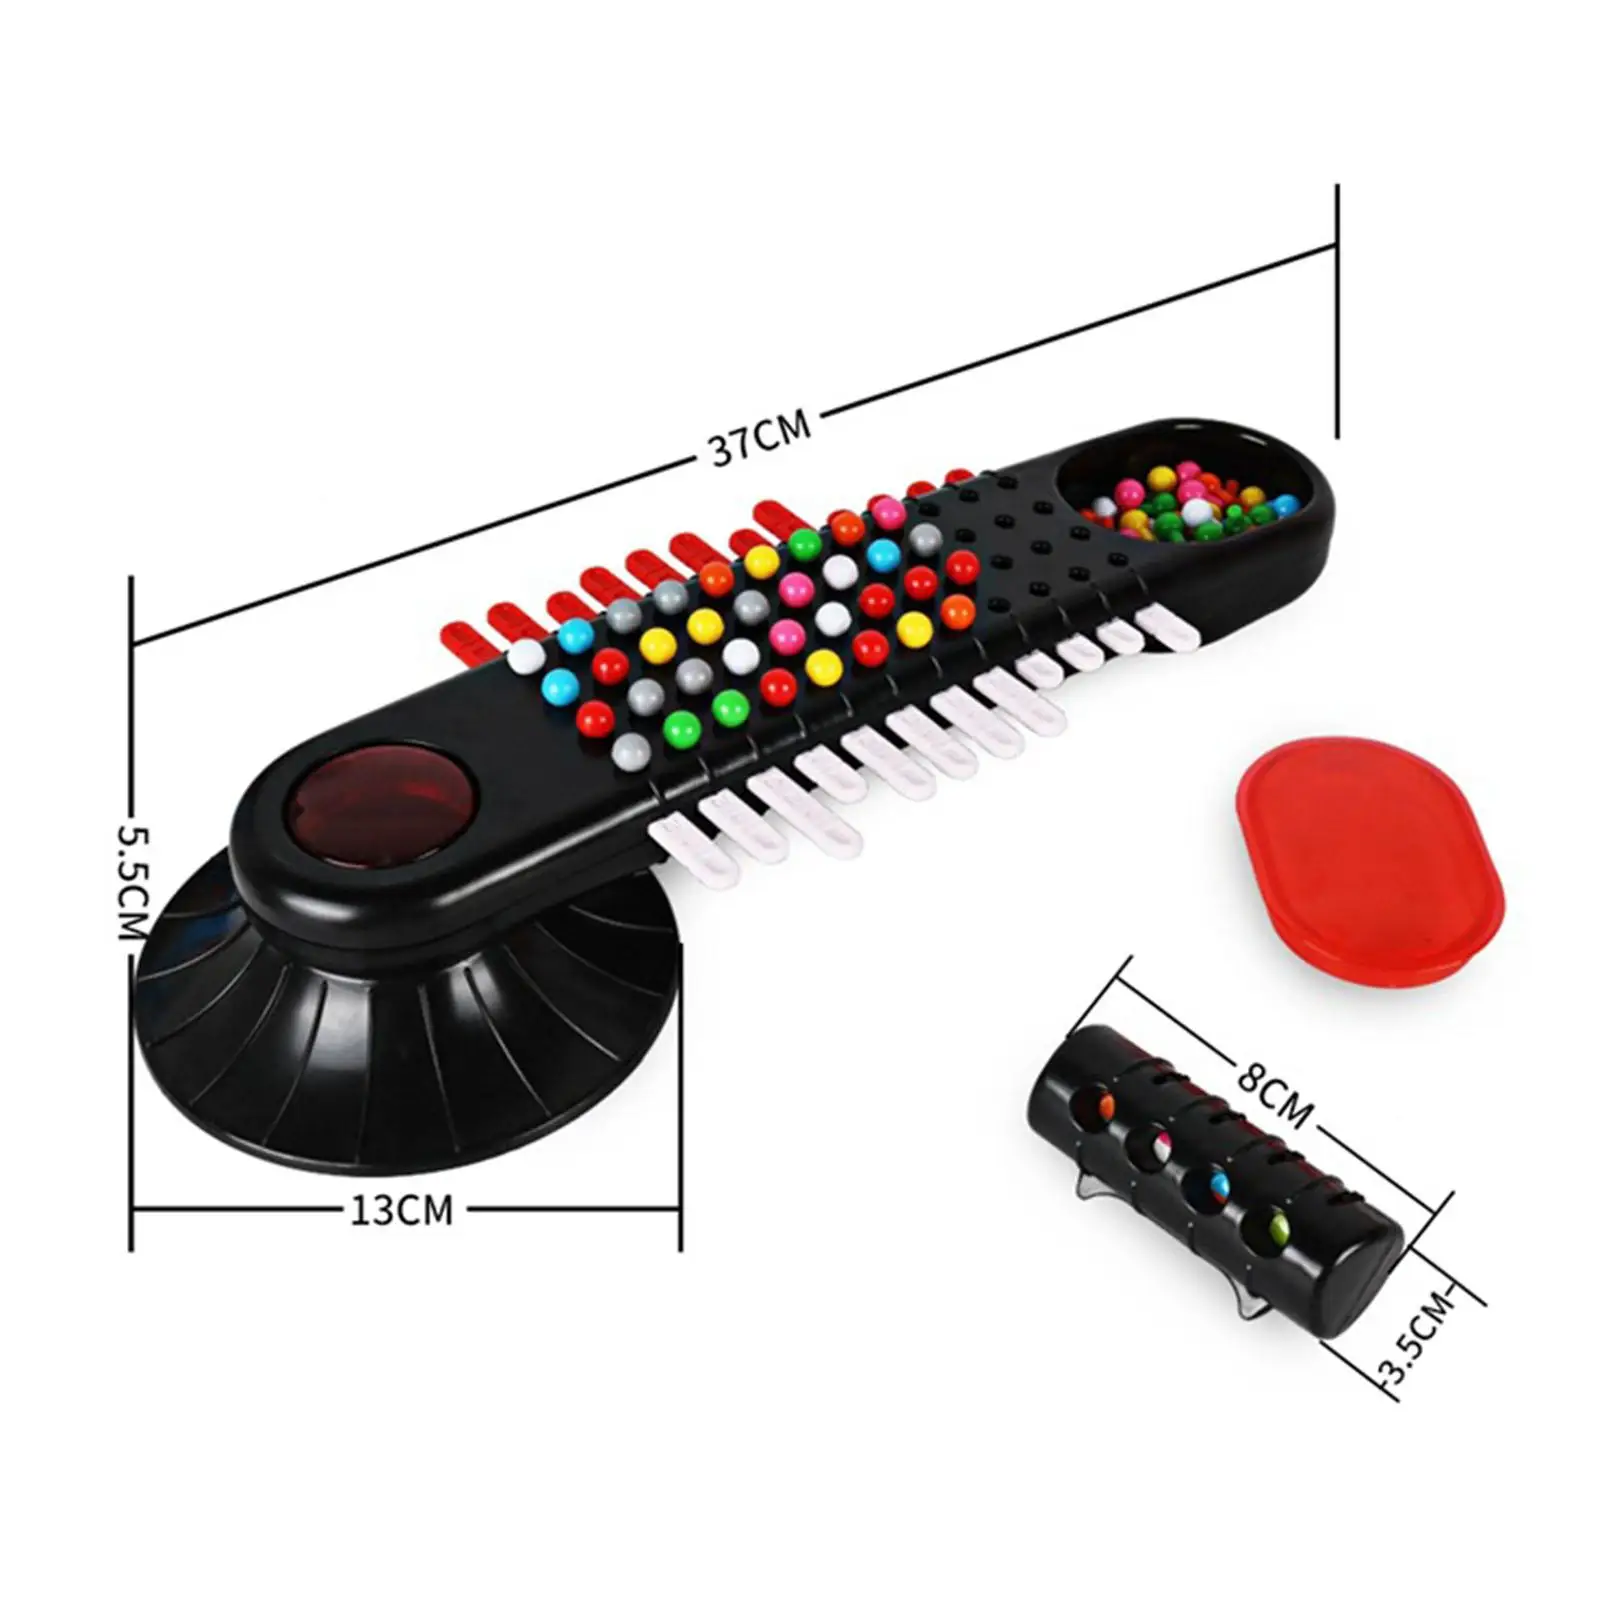 Code Cracking Bead Game Codebreaker Game Educational Development Toys solution Password Toy for Age 8 and up Children School